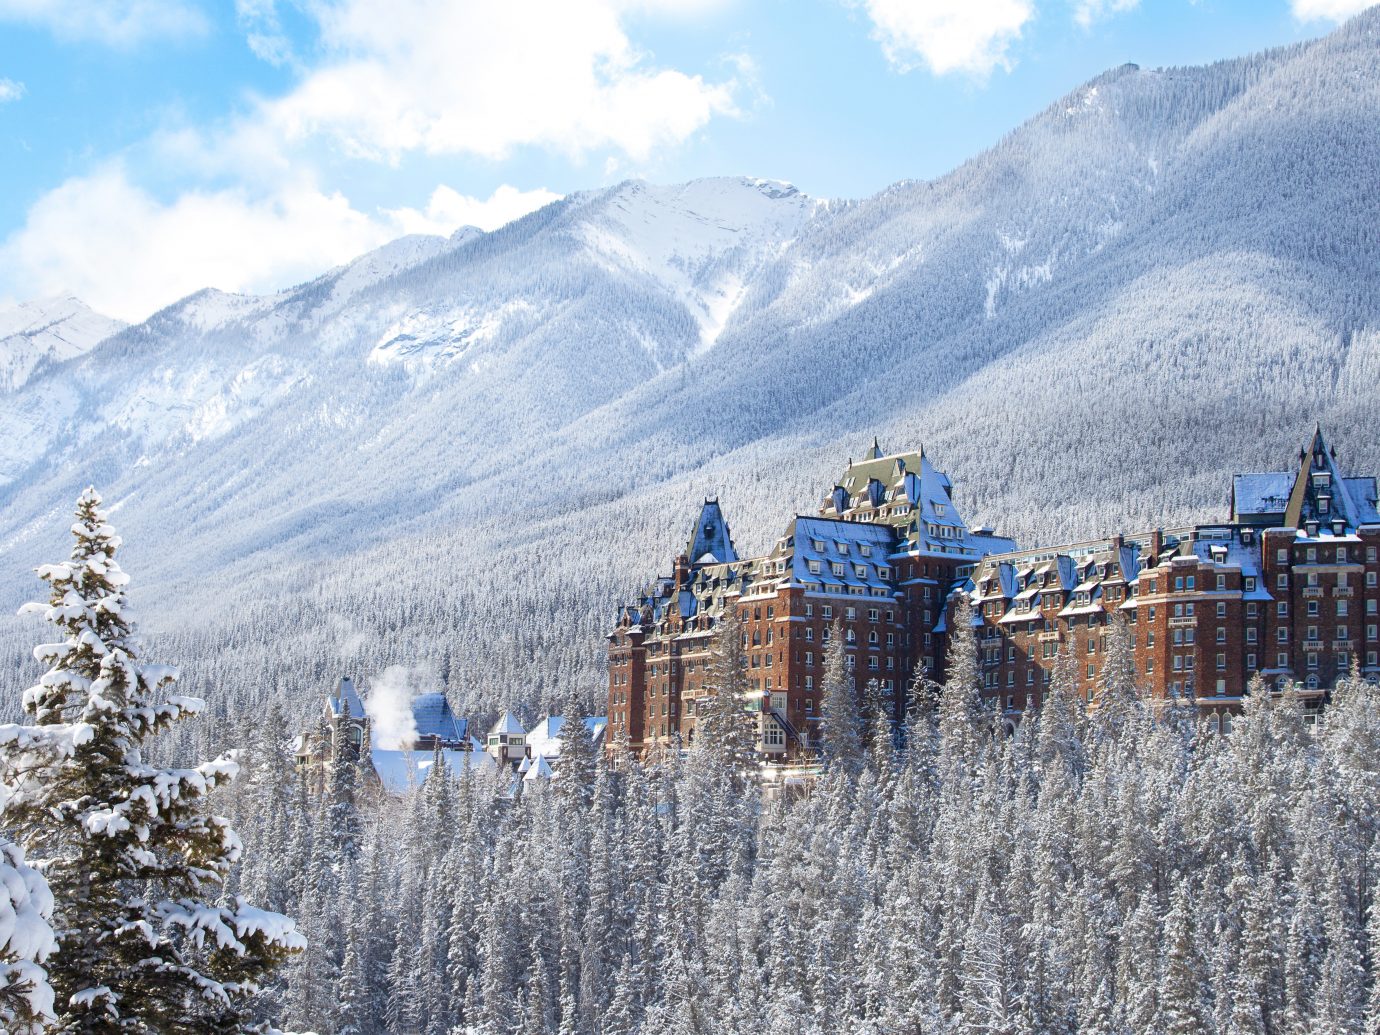 Alberta Architecture Boutique Hotels Buildings Canada Exterior Hotels Mountains Outdoors Resort Scenic views Trip Ideas outdoor mountain sky mountainous landforms snow Winter Nature mountain range wilderness weather season alps frost ridge highland